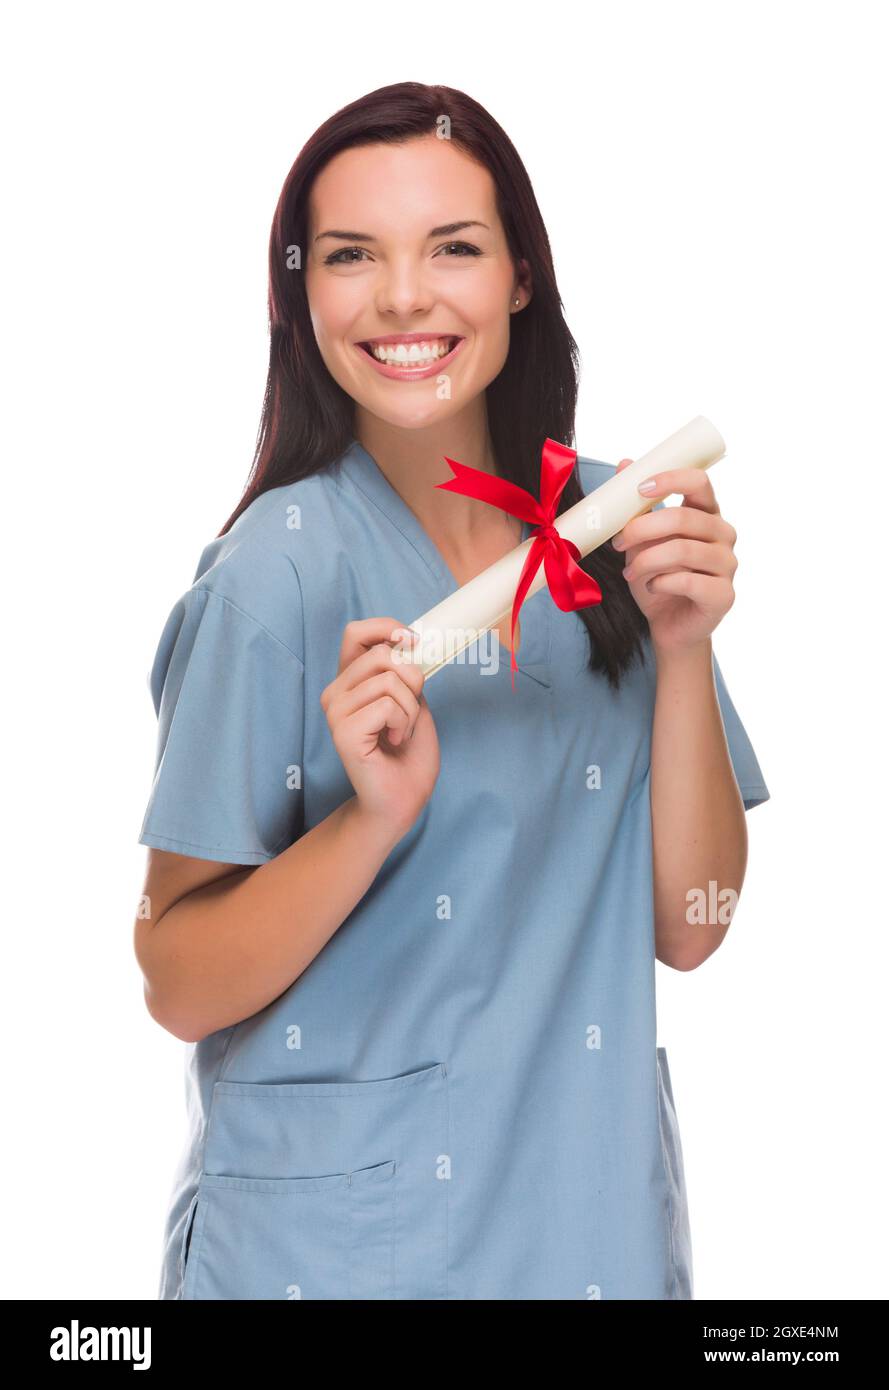 Attractive Mixed Race Female Nurse or Doctor Wearing Scrubs and Stethoscope Holding Her Diploma Isolated on a White Background. Stock Photo